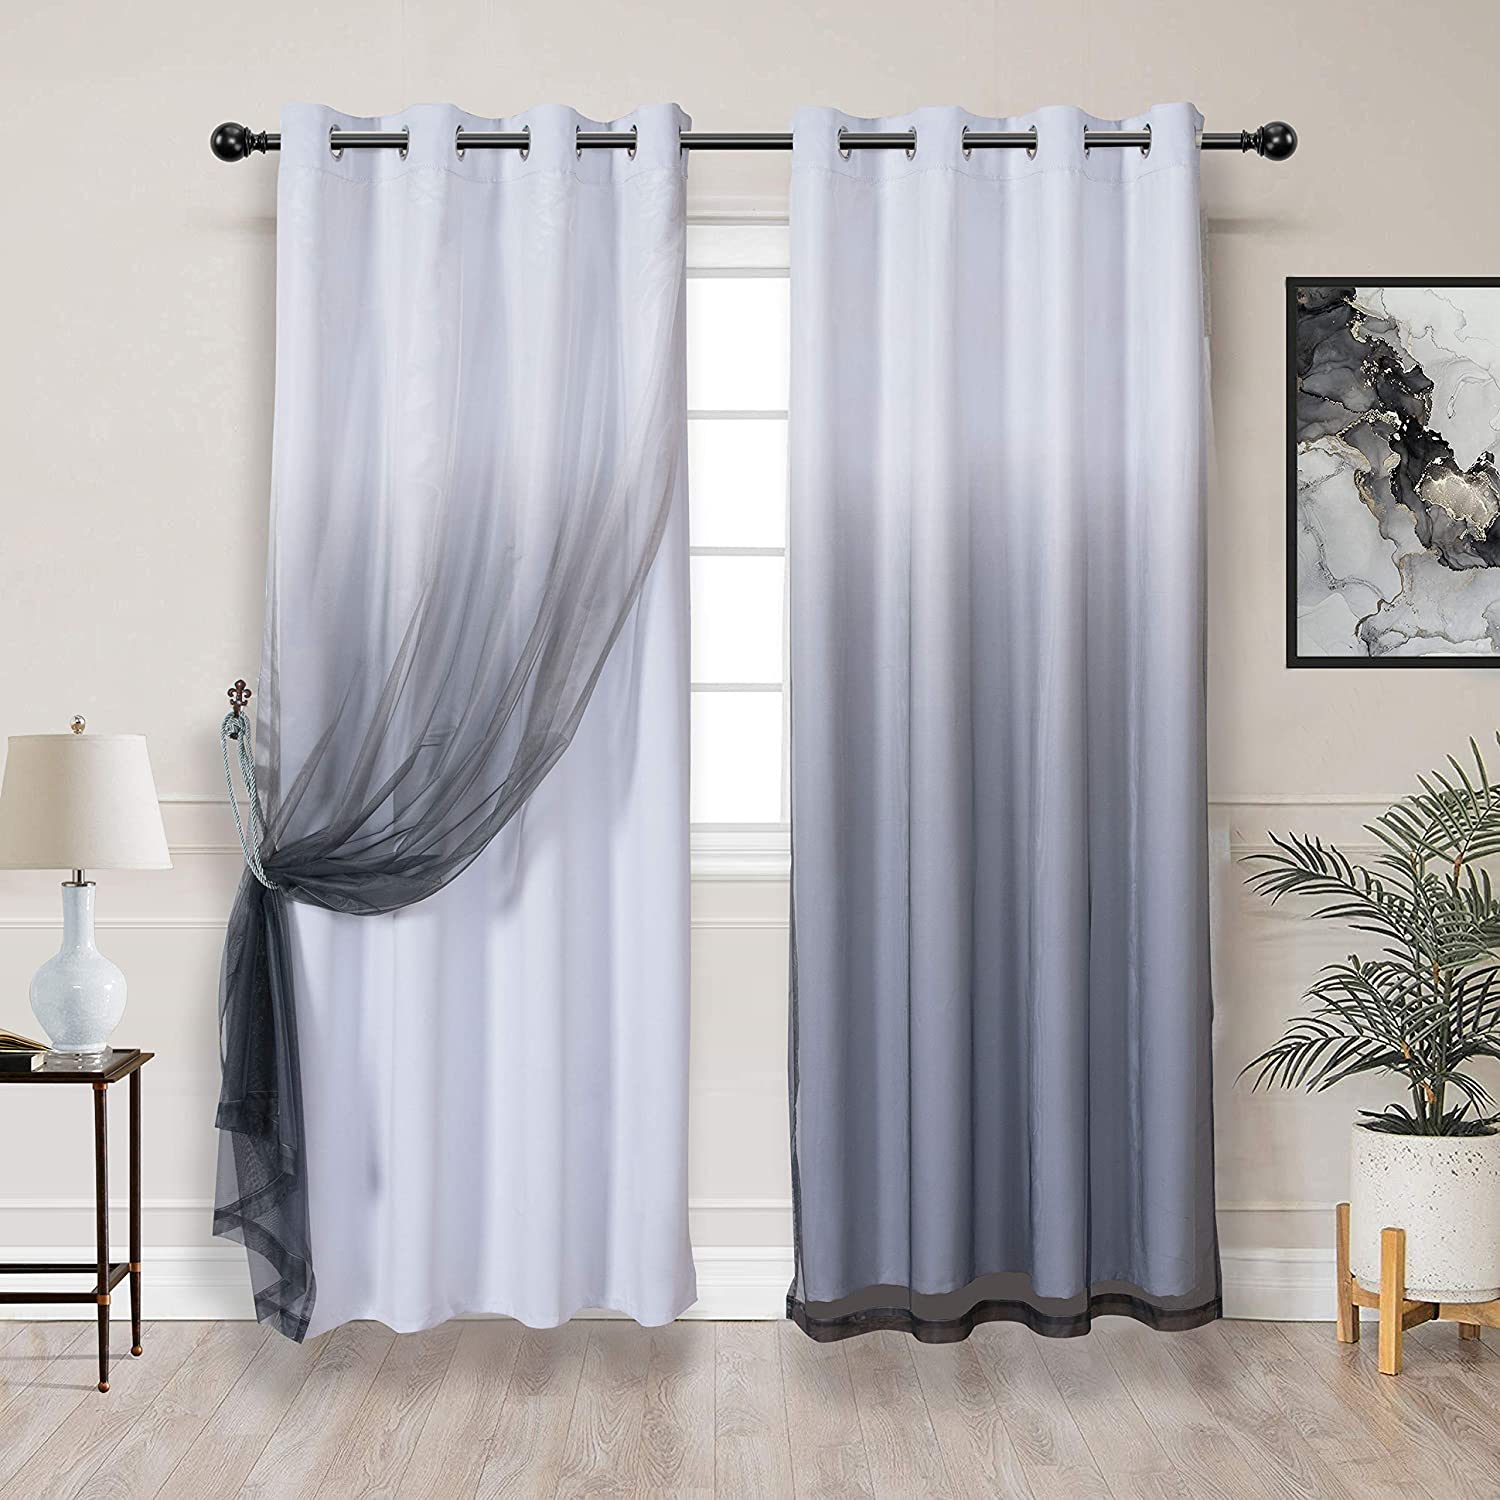 WONTEX Mix & Match Blackout and Sheer Ombre Curtains for Living Room